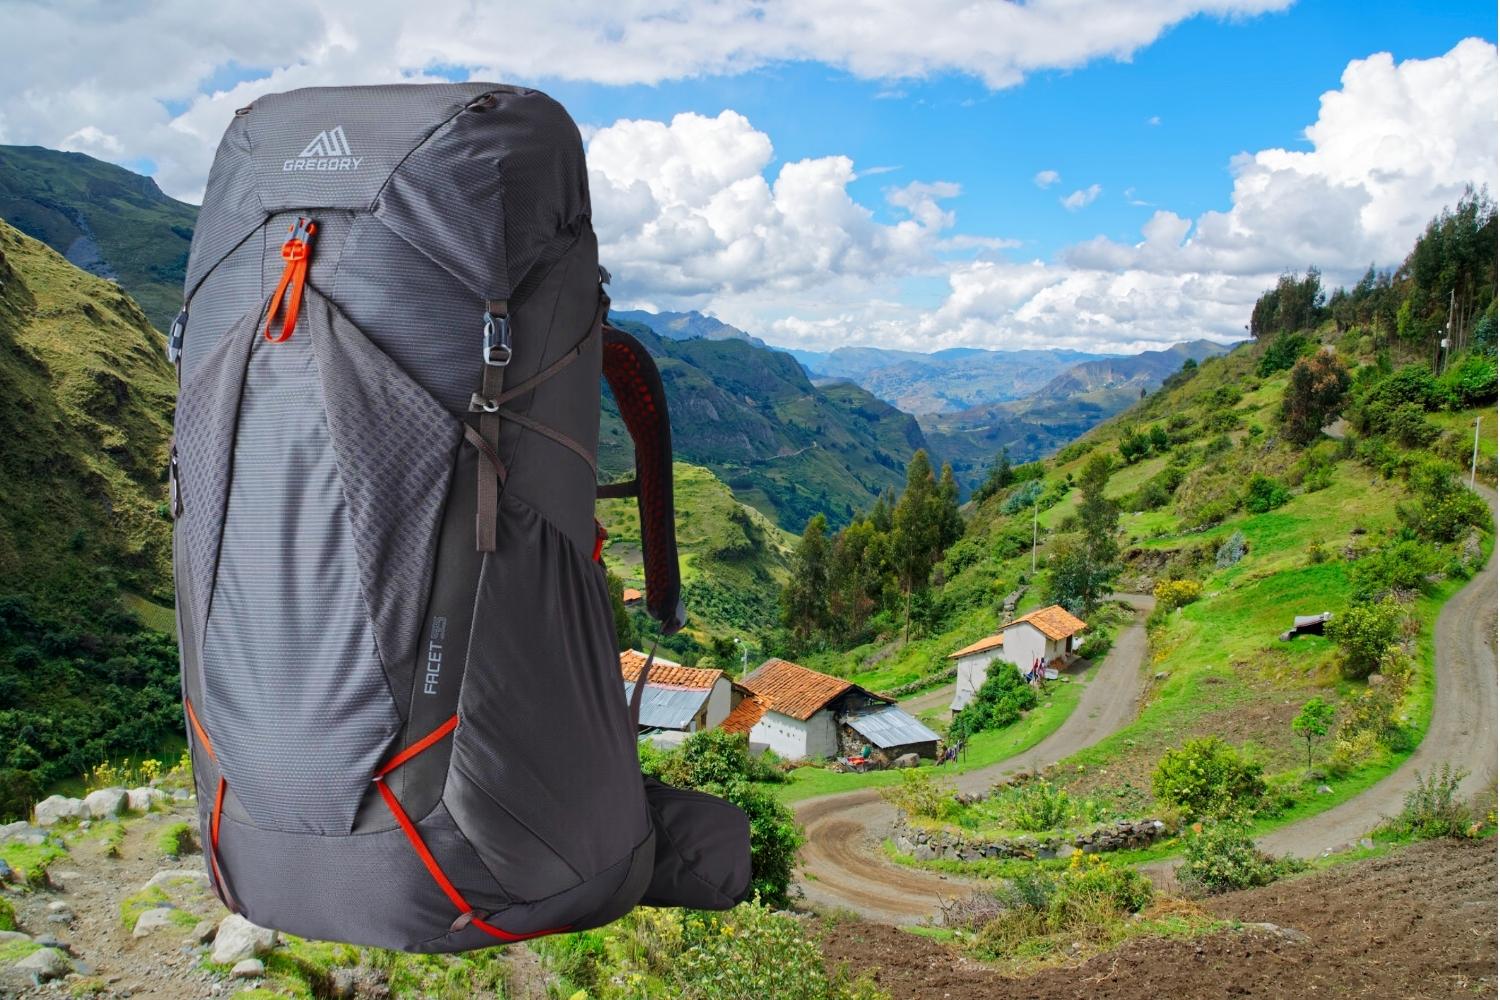 MOST COMFORTABLE HIKING BACKPACK: GREGORY FACET 55